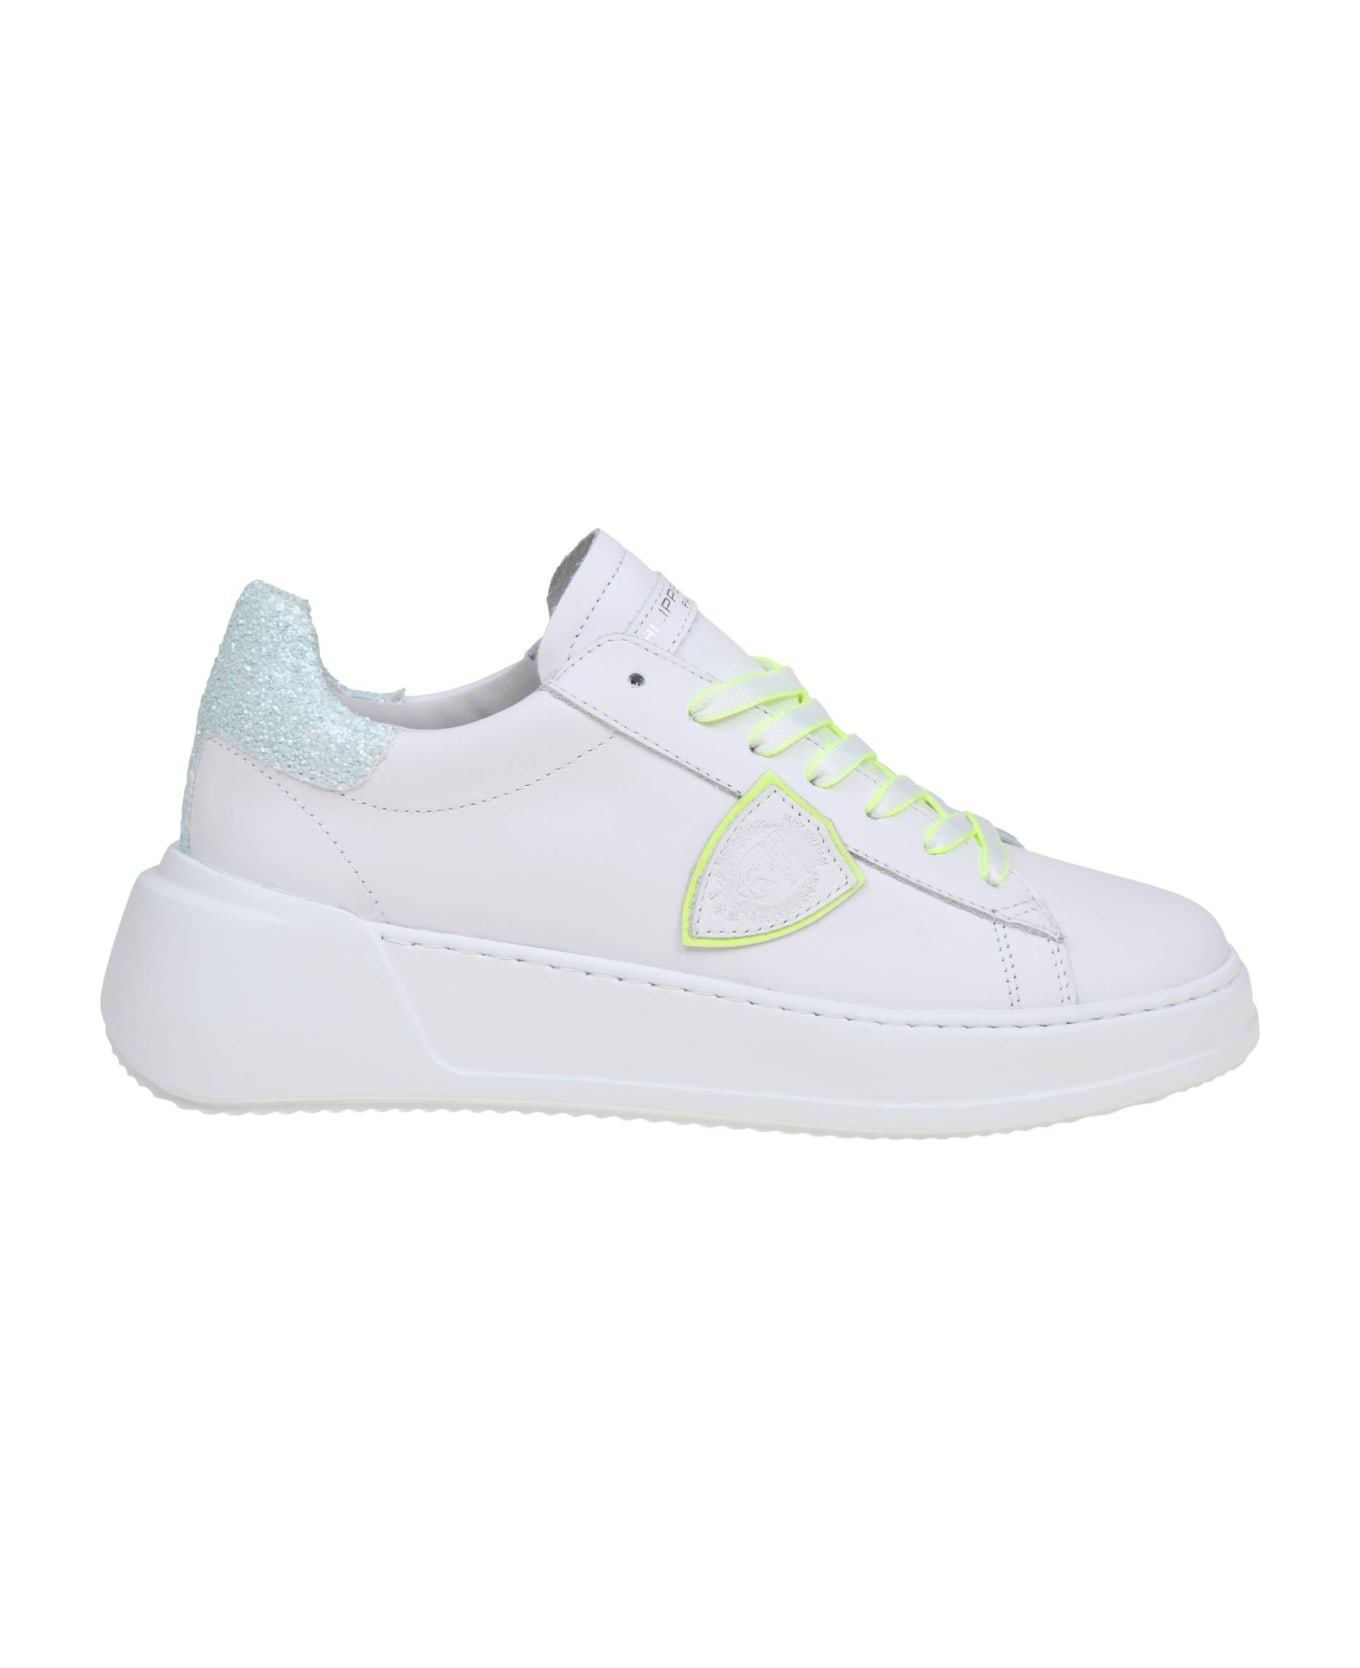 Philippe Model Tres Temple Low In White And Yellow Leather - Blanc/Jaune